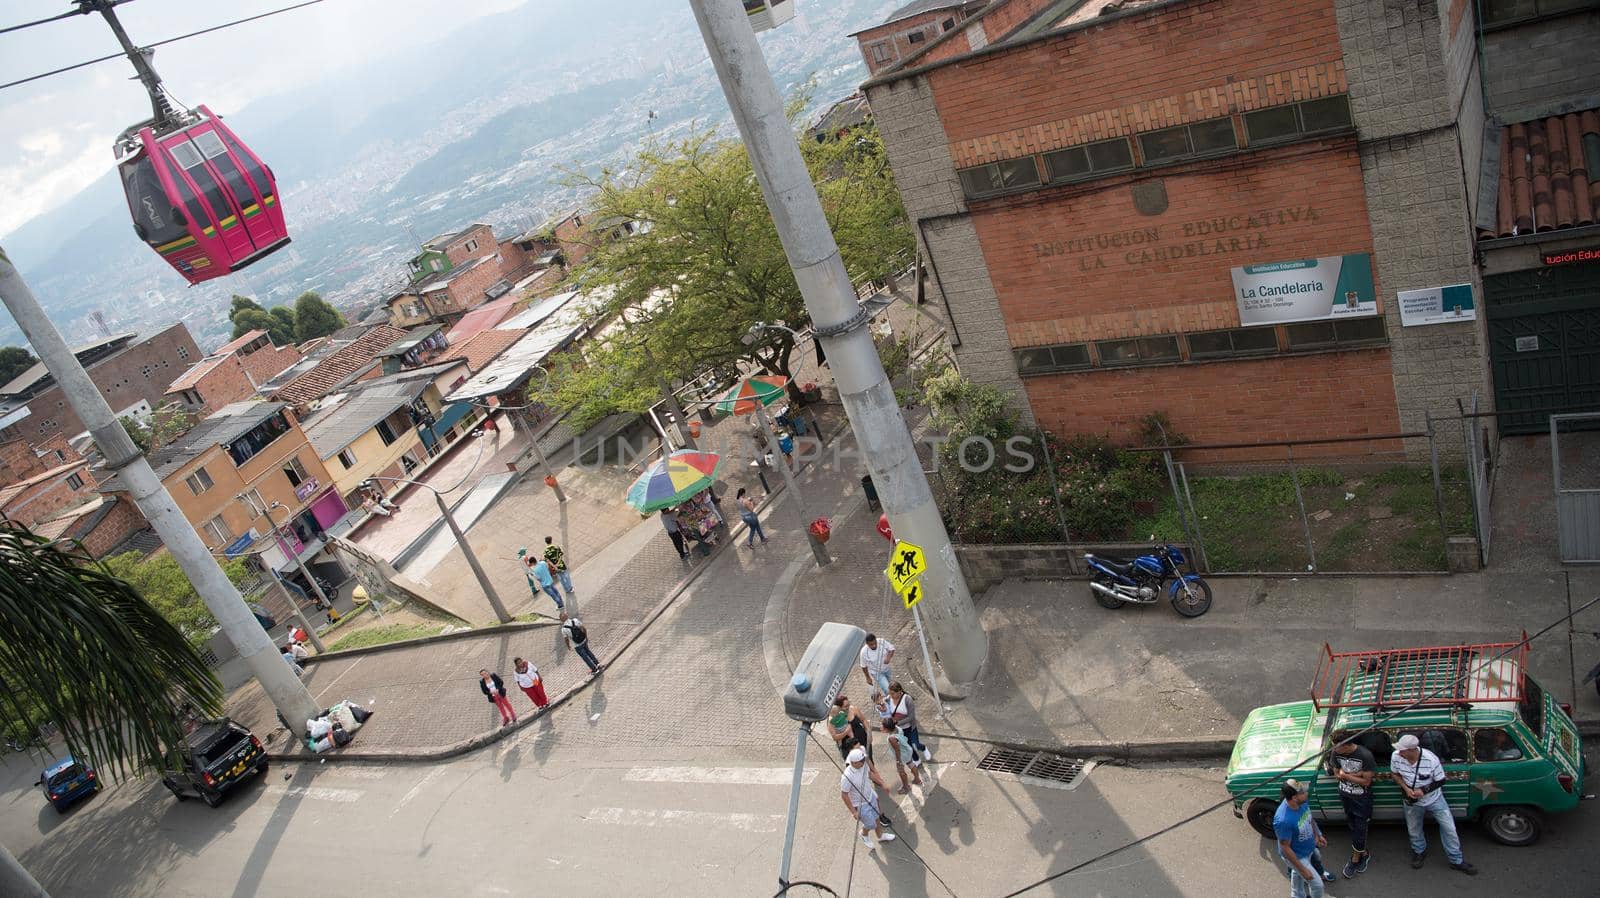 Cable car hanging above houses Medellin, Colombia. by jyurinko